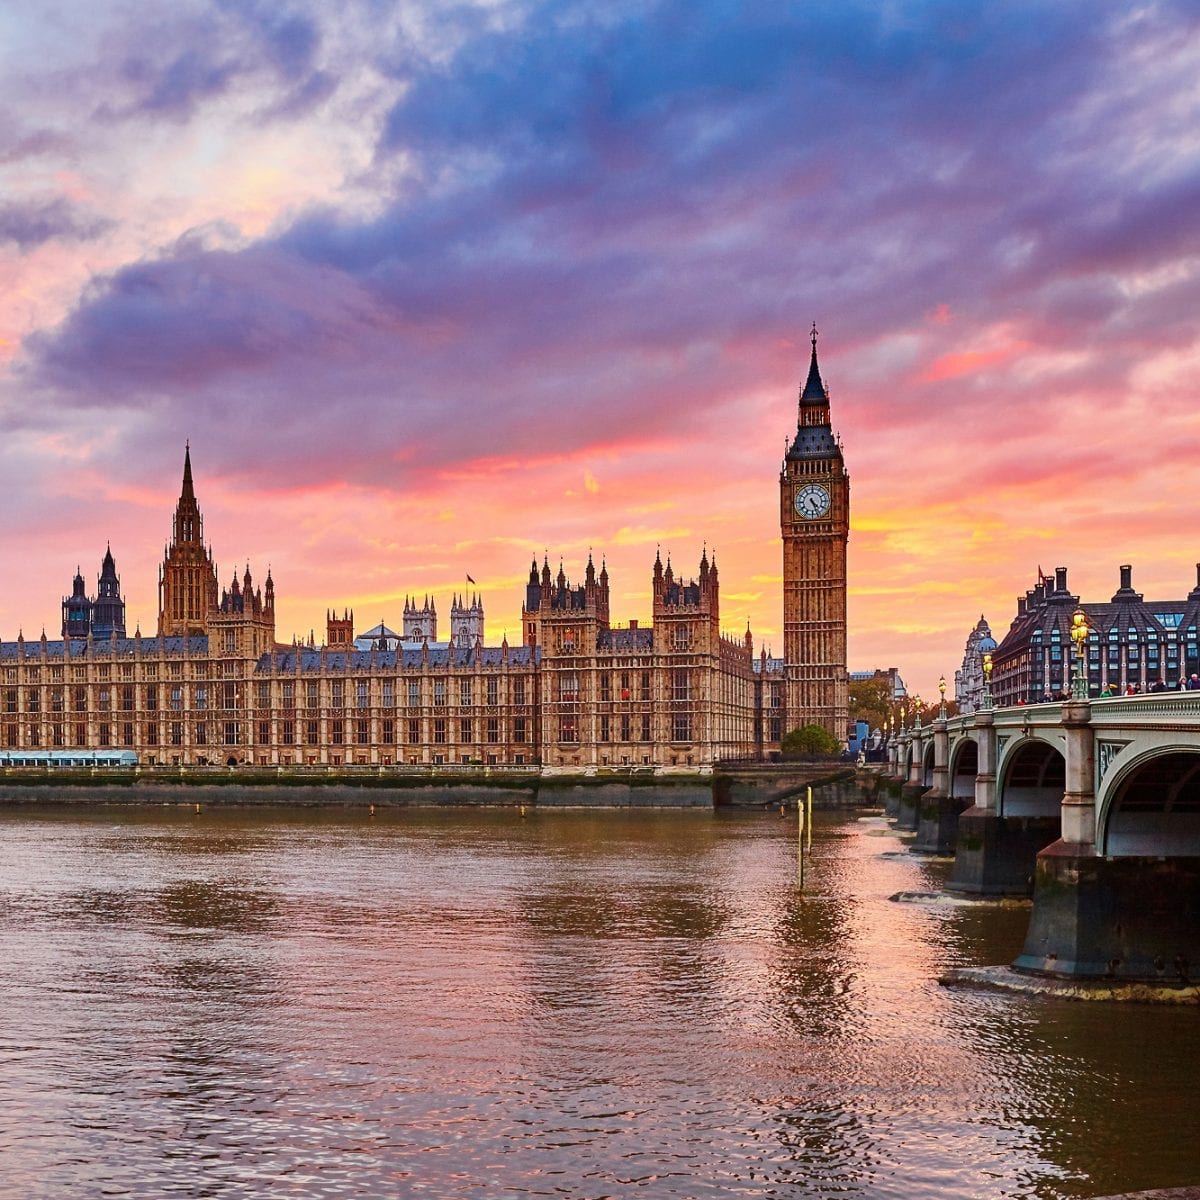 The famous Houses of Parliament and Big Ben pictures by the River Thames with a pink and orange sunset behind the iconic London attractions